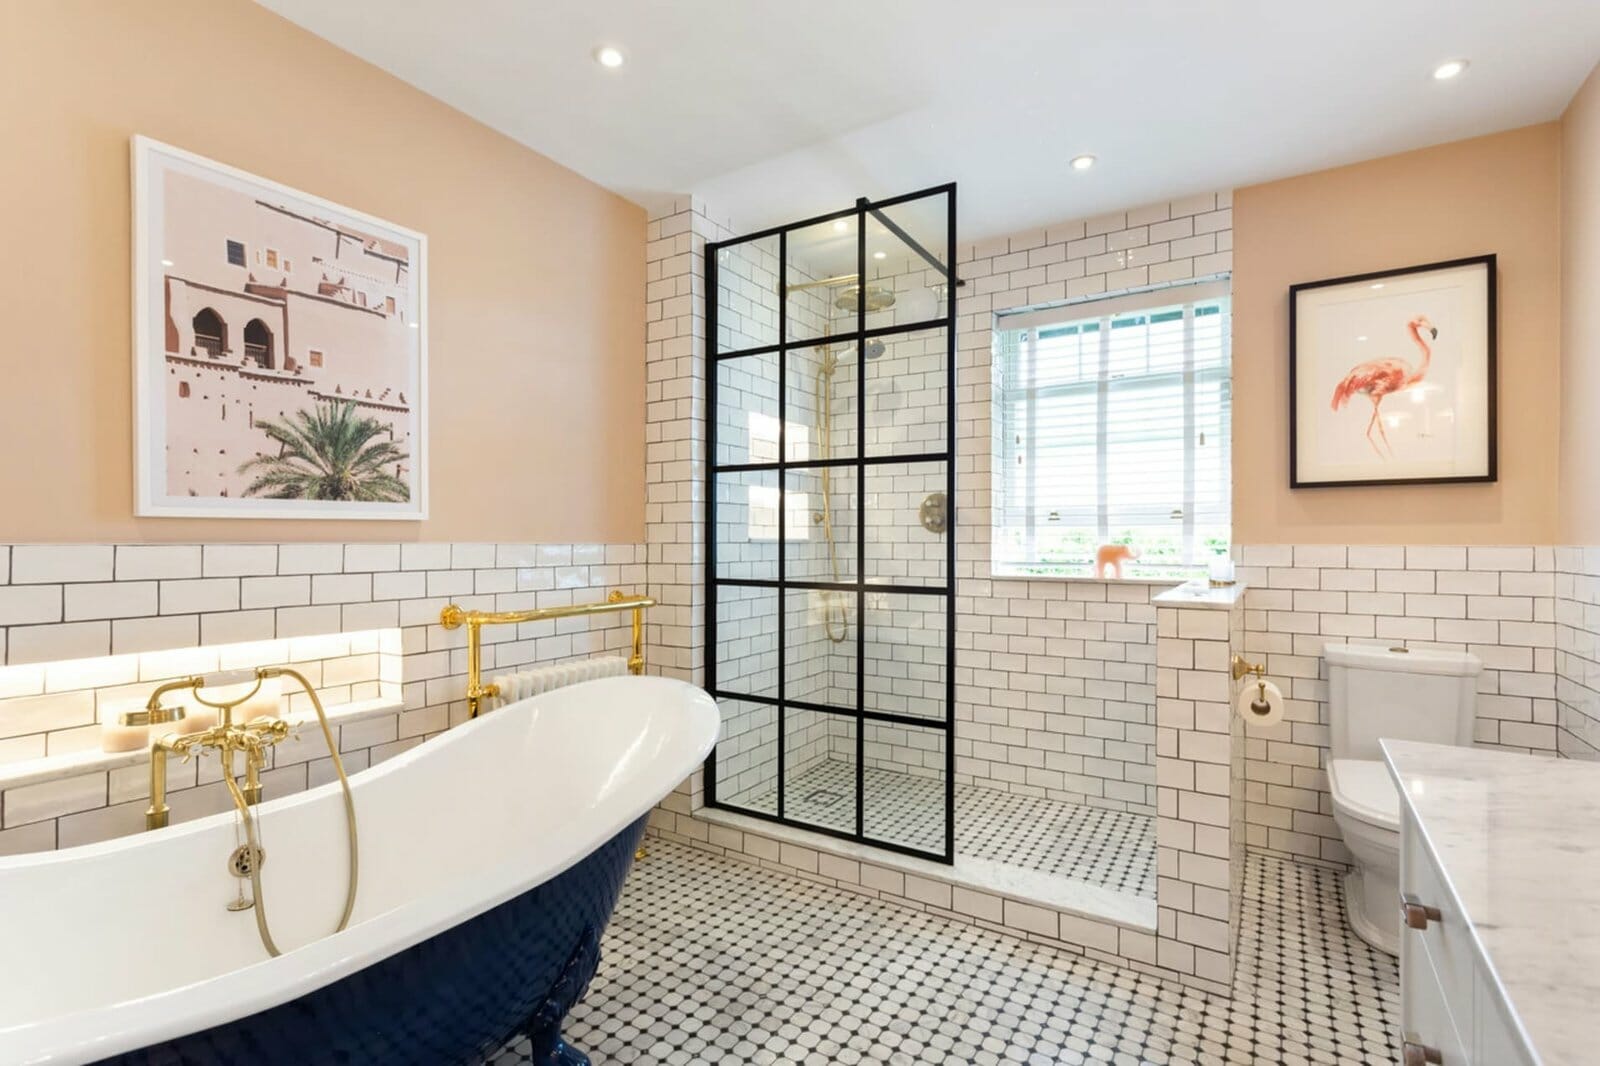 22 Beautiful Bathroom Shower Ideas for Every Style